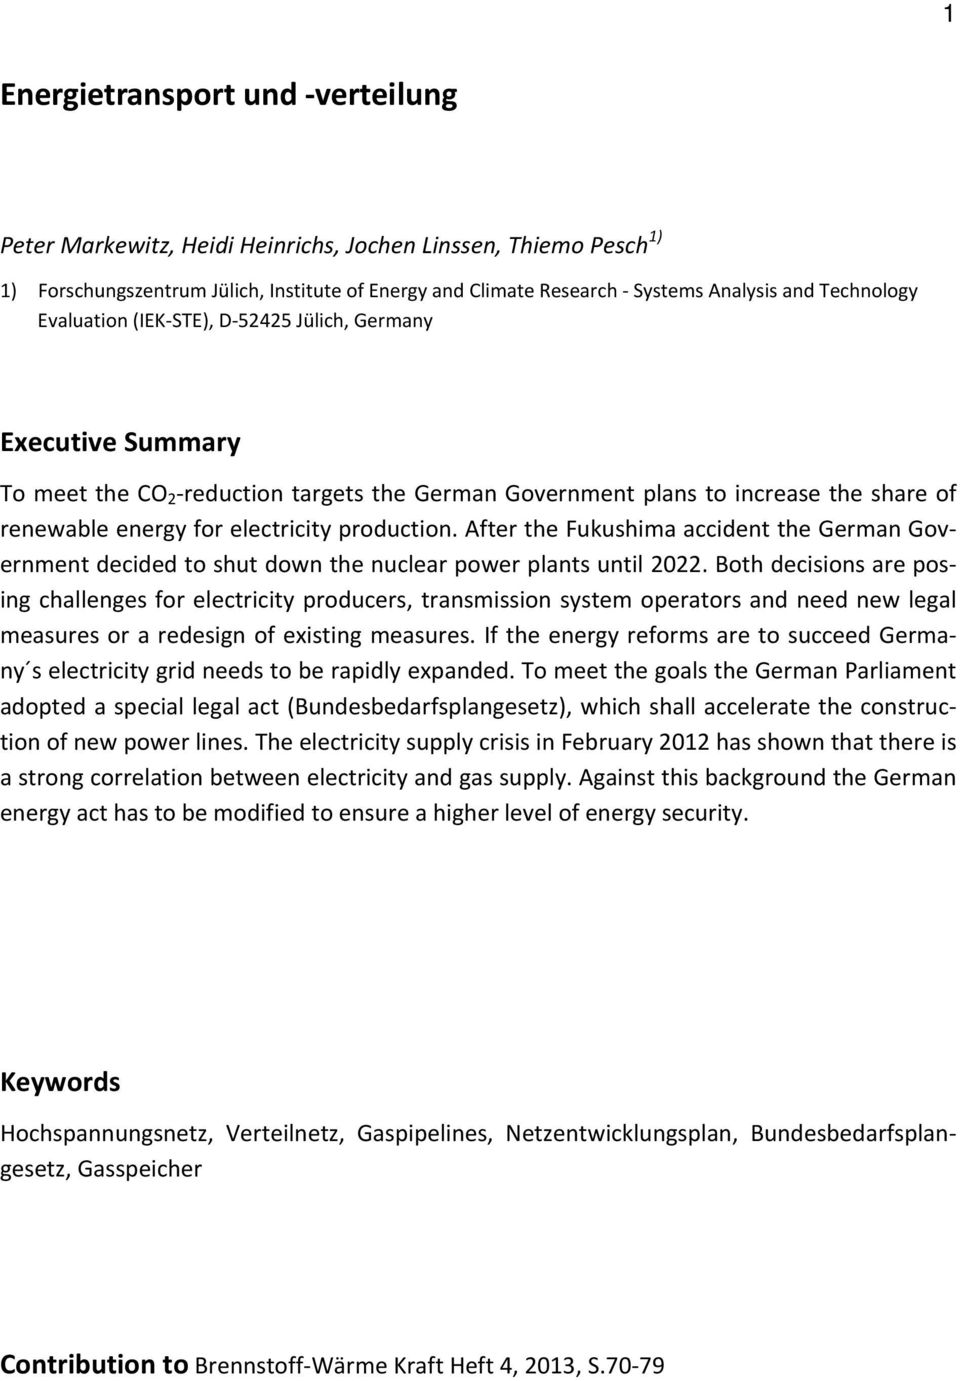 production. After the Fukushima accident the German Government decided to shut down the nuclear power plants until 2022.